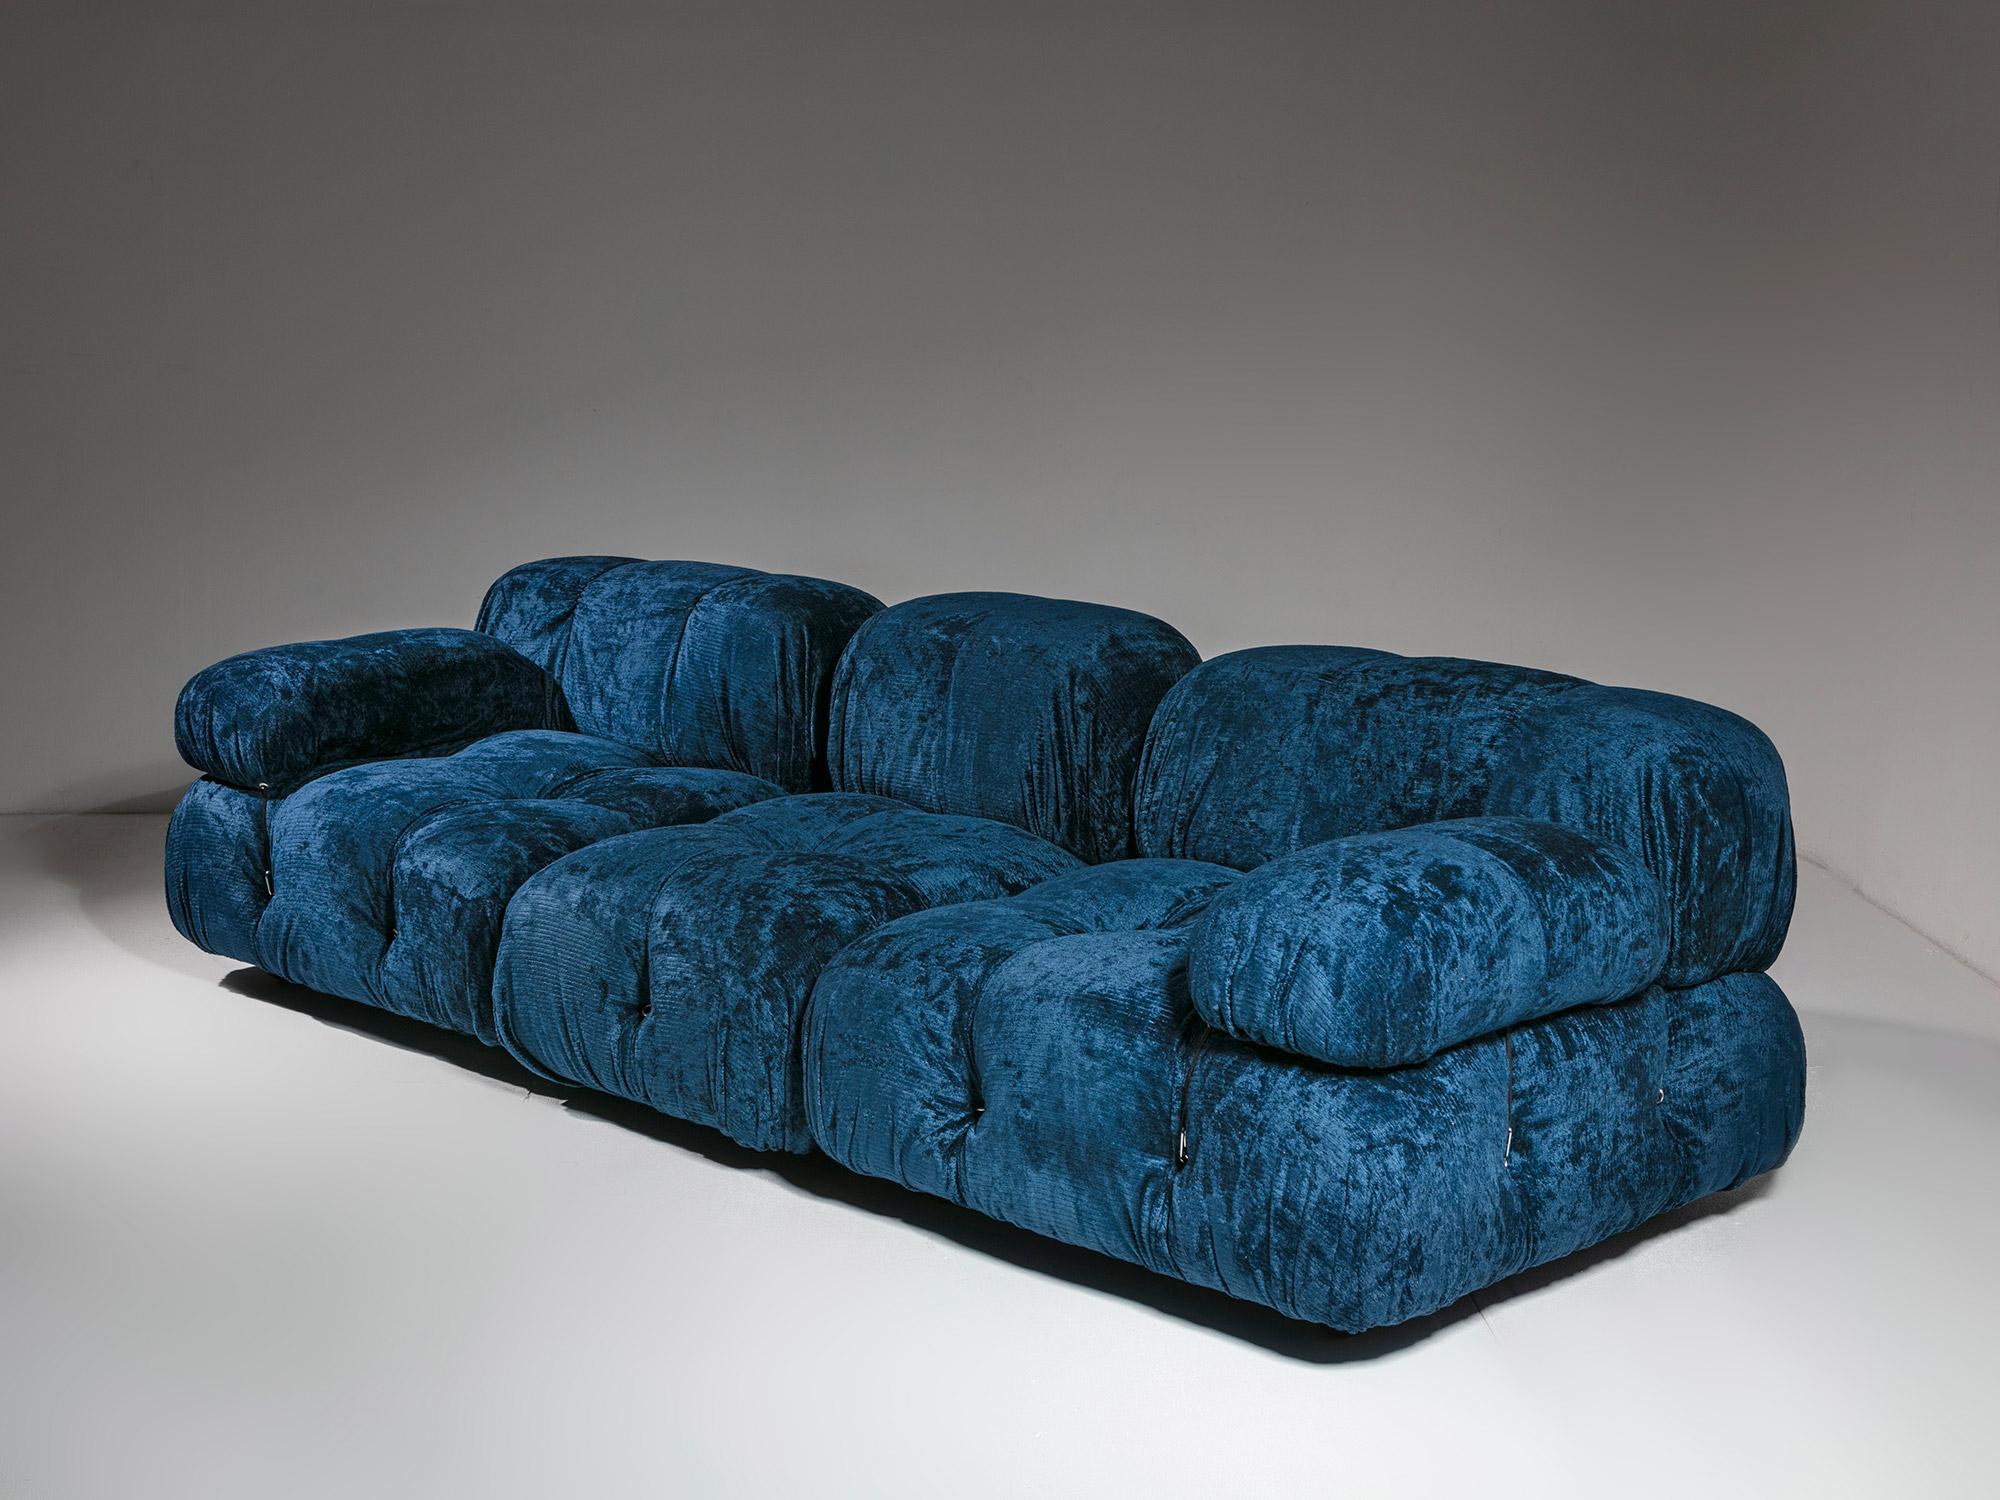 Camaleonda sectional sofa by Mario Bellini for B&B.
70s labelled edition featuring blue chenille covering.
Also available one matching lounge chair with the same blue covering.  